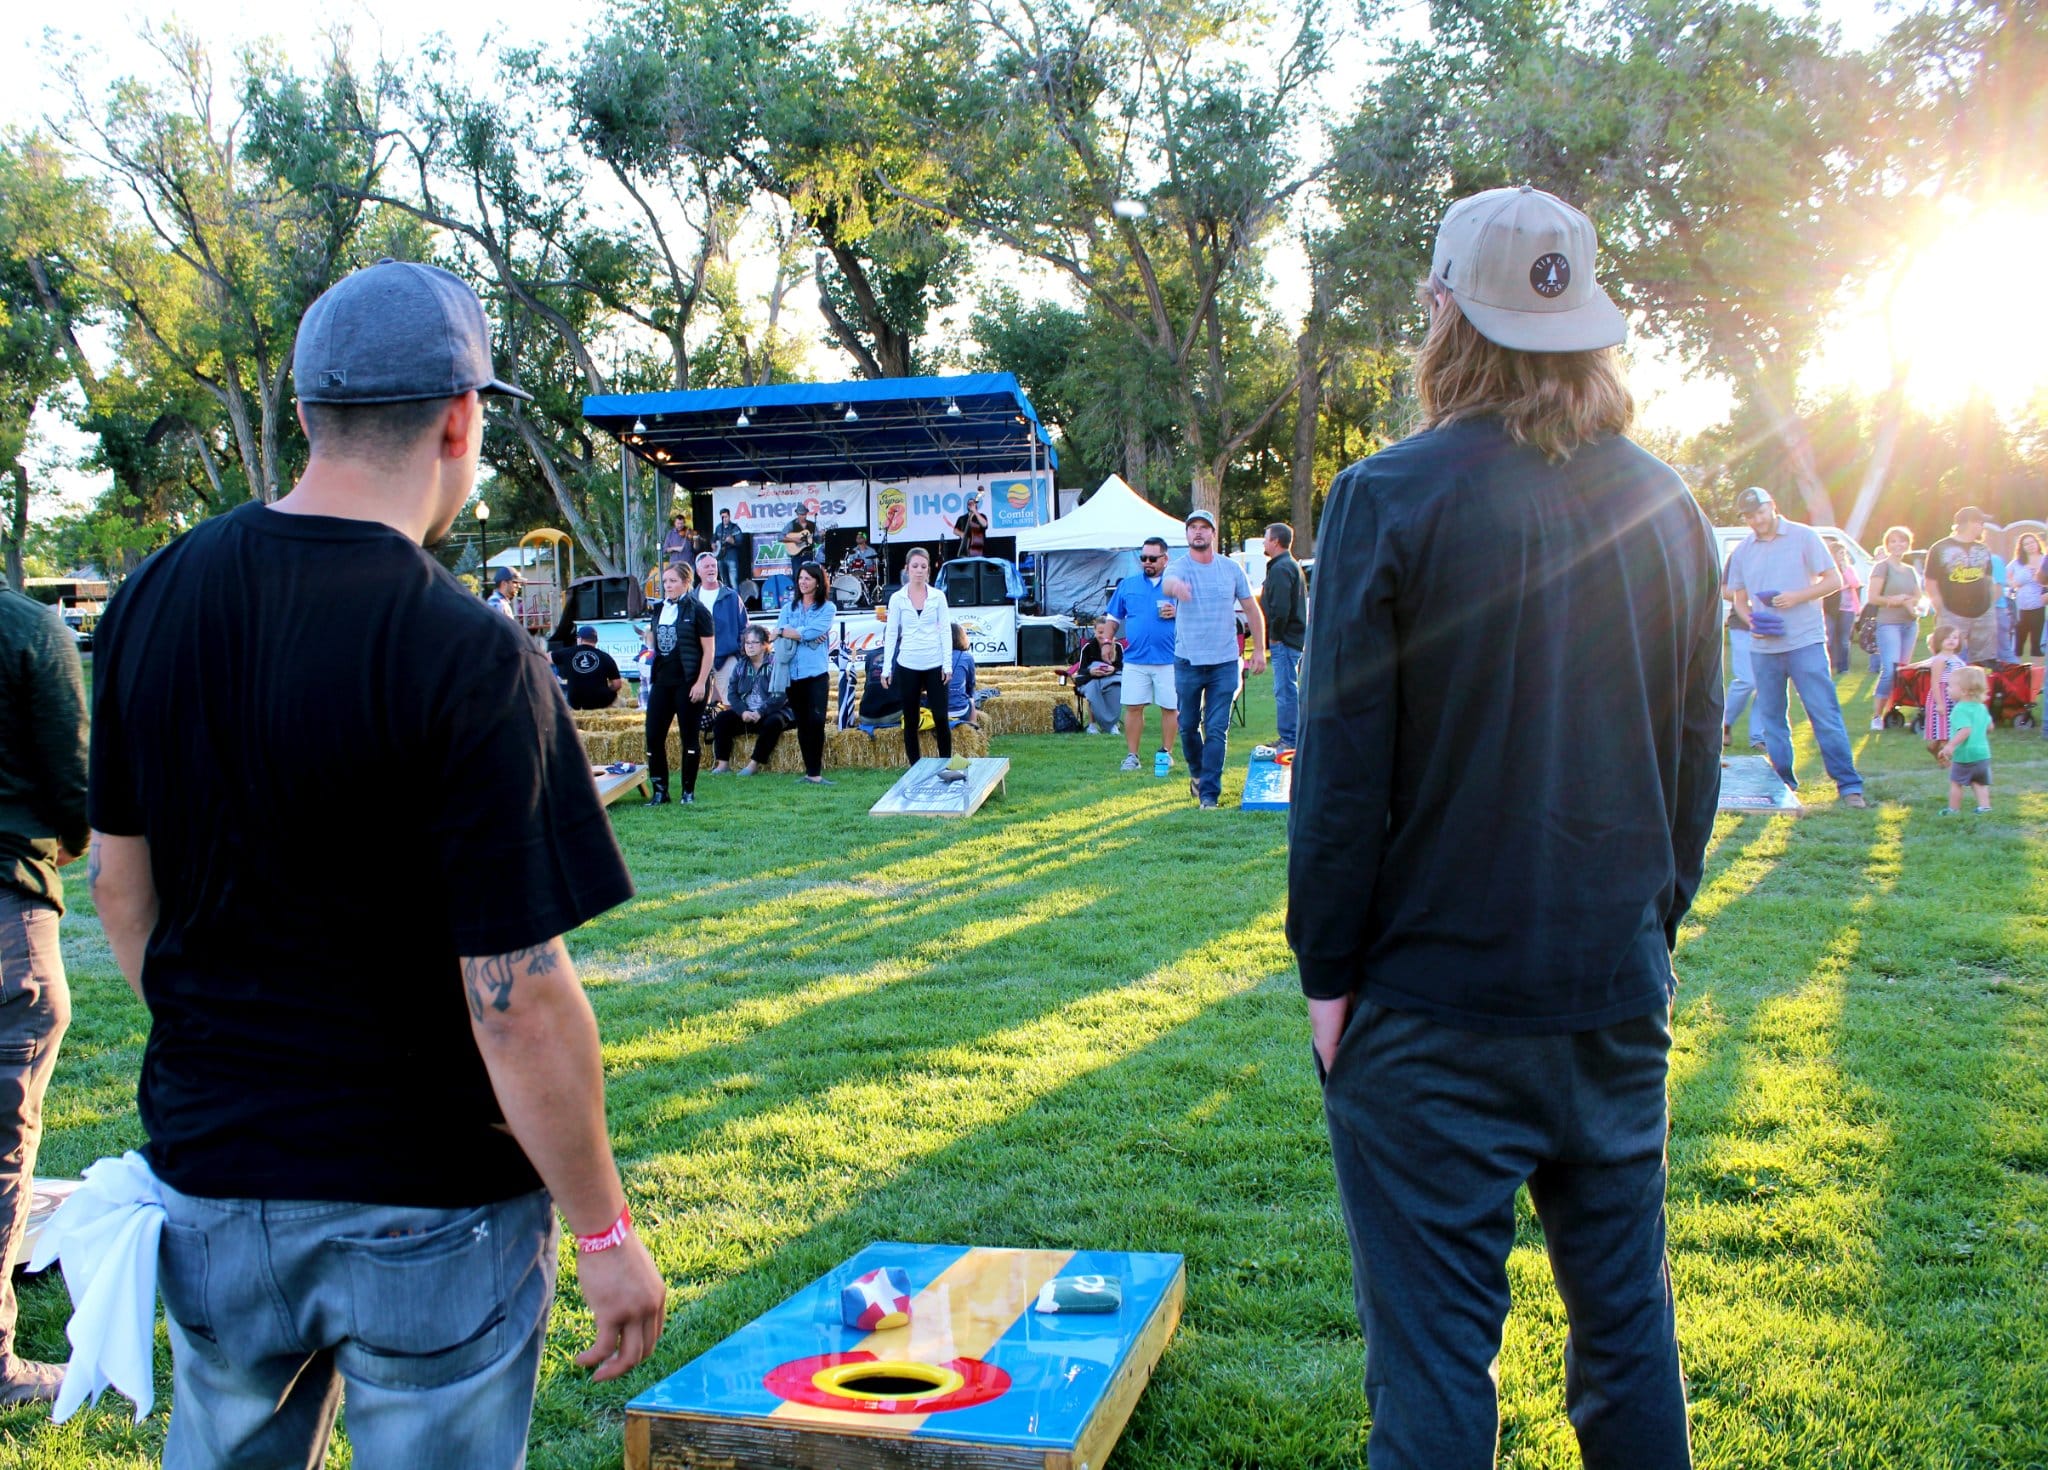 People playing in a cornhole tournament at Beat the Heat BBQ & Brews festival in Alamosa. The sun shining through the trees and casting shadows on the grass inbetween the cornhole boards